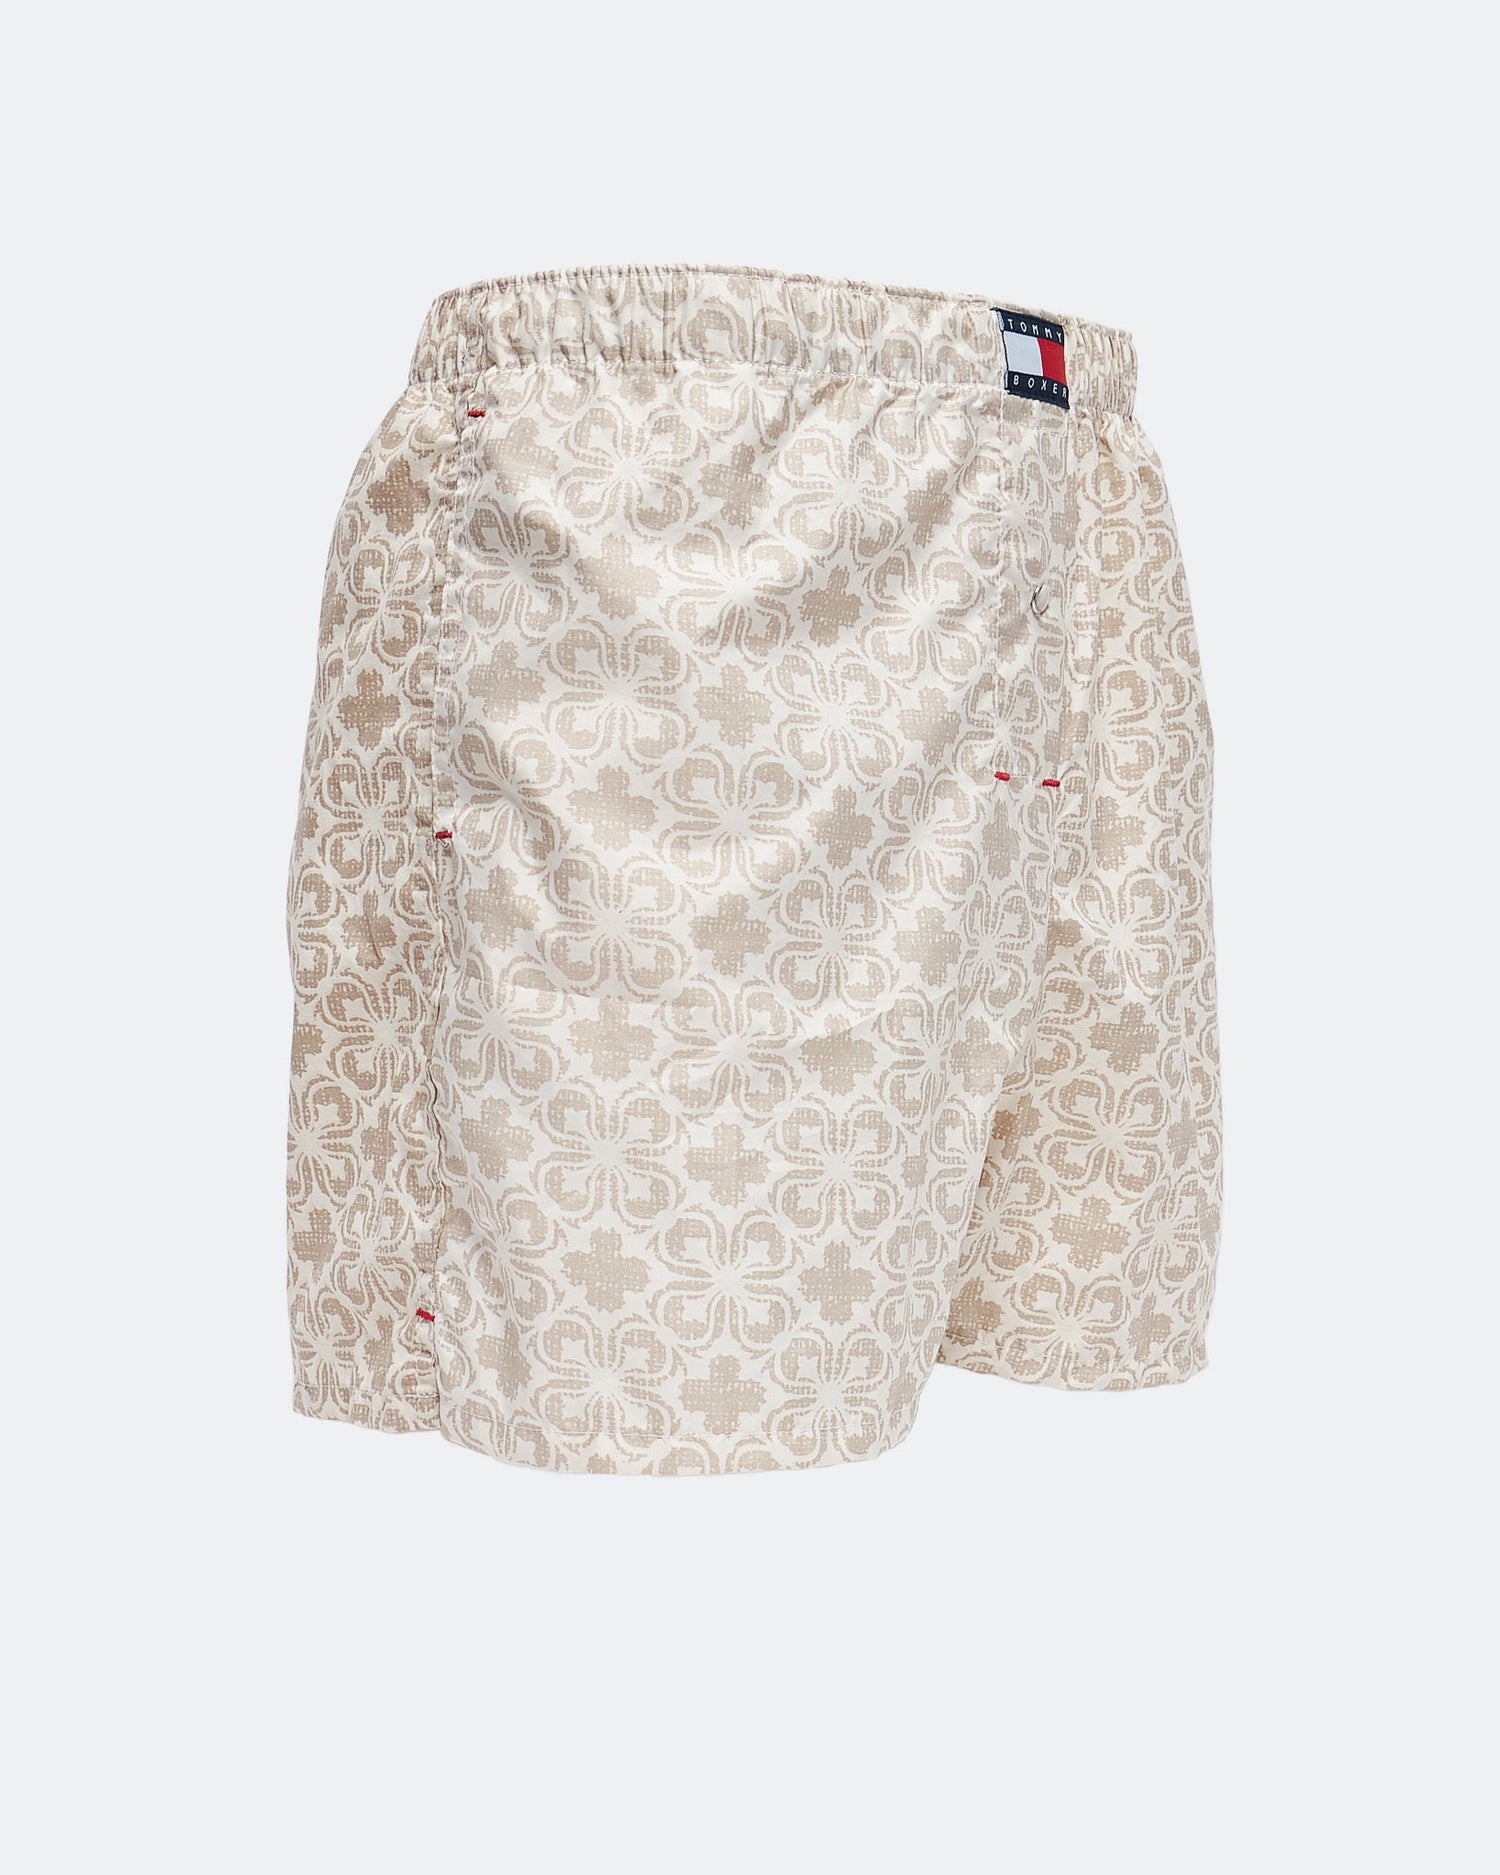 MOI OUTFIT-Floral Over Printed Men Boxer 6.90